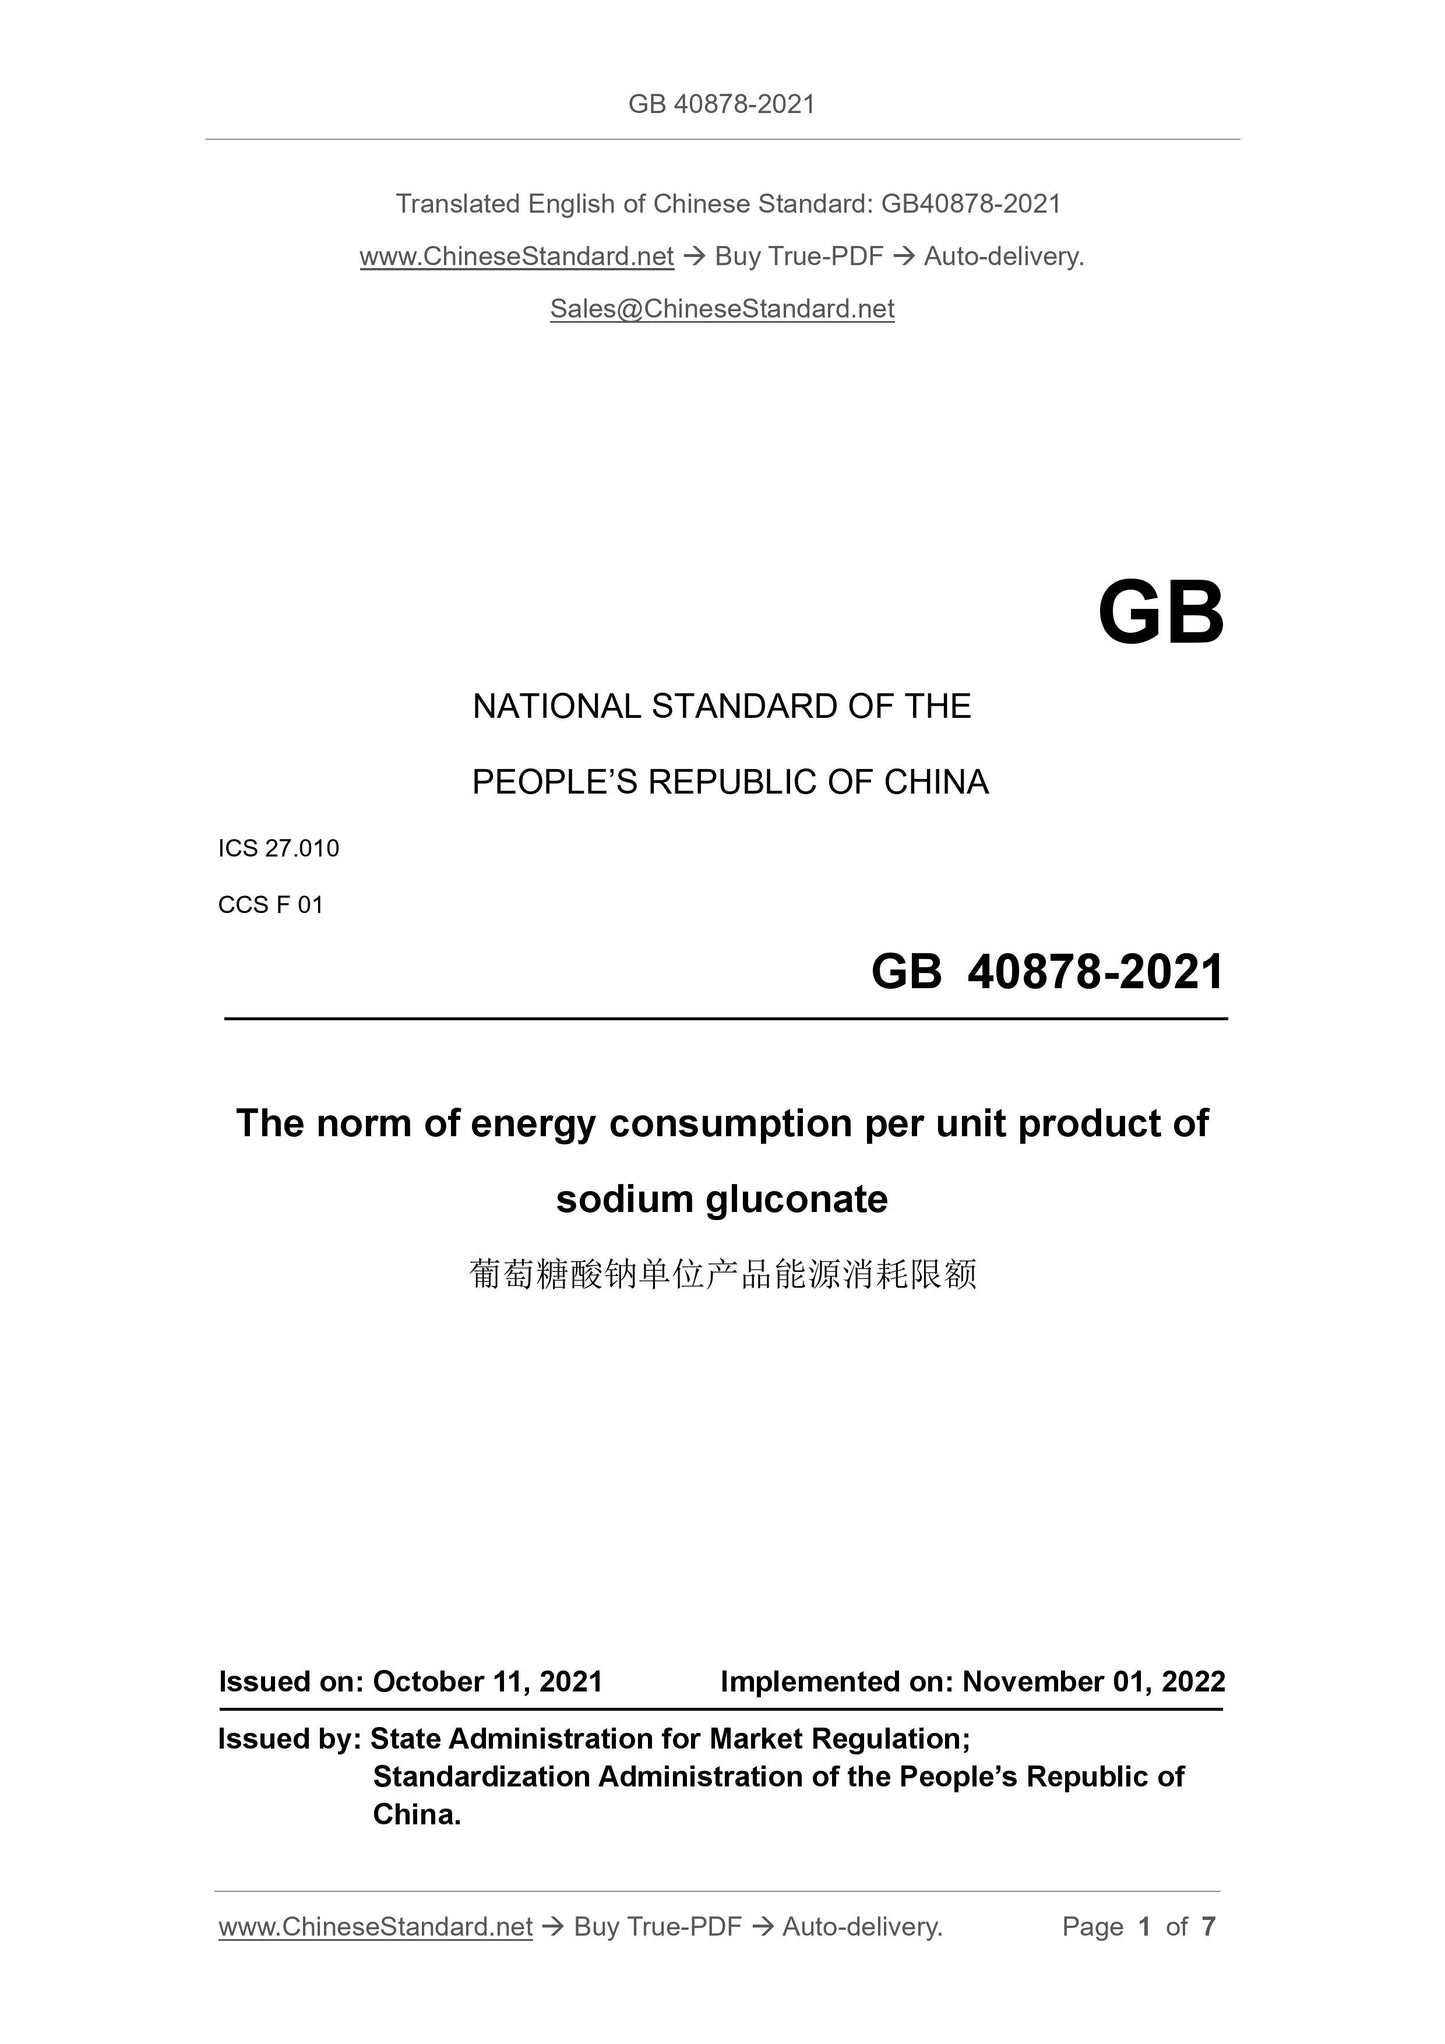 GB 40878-2021 Page 1